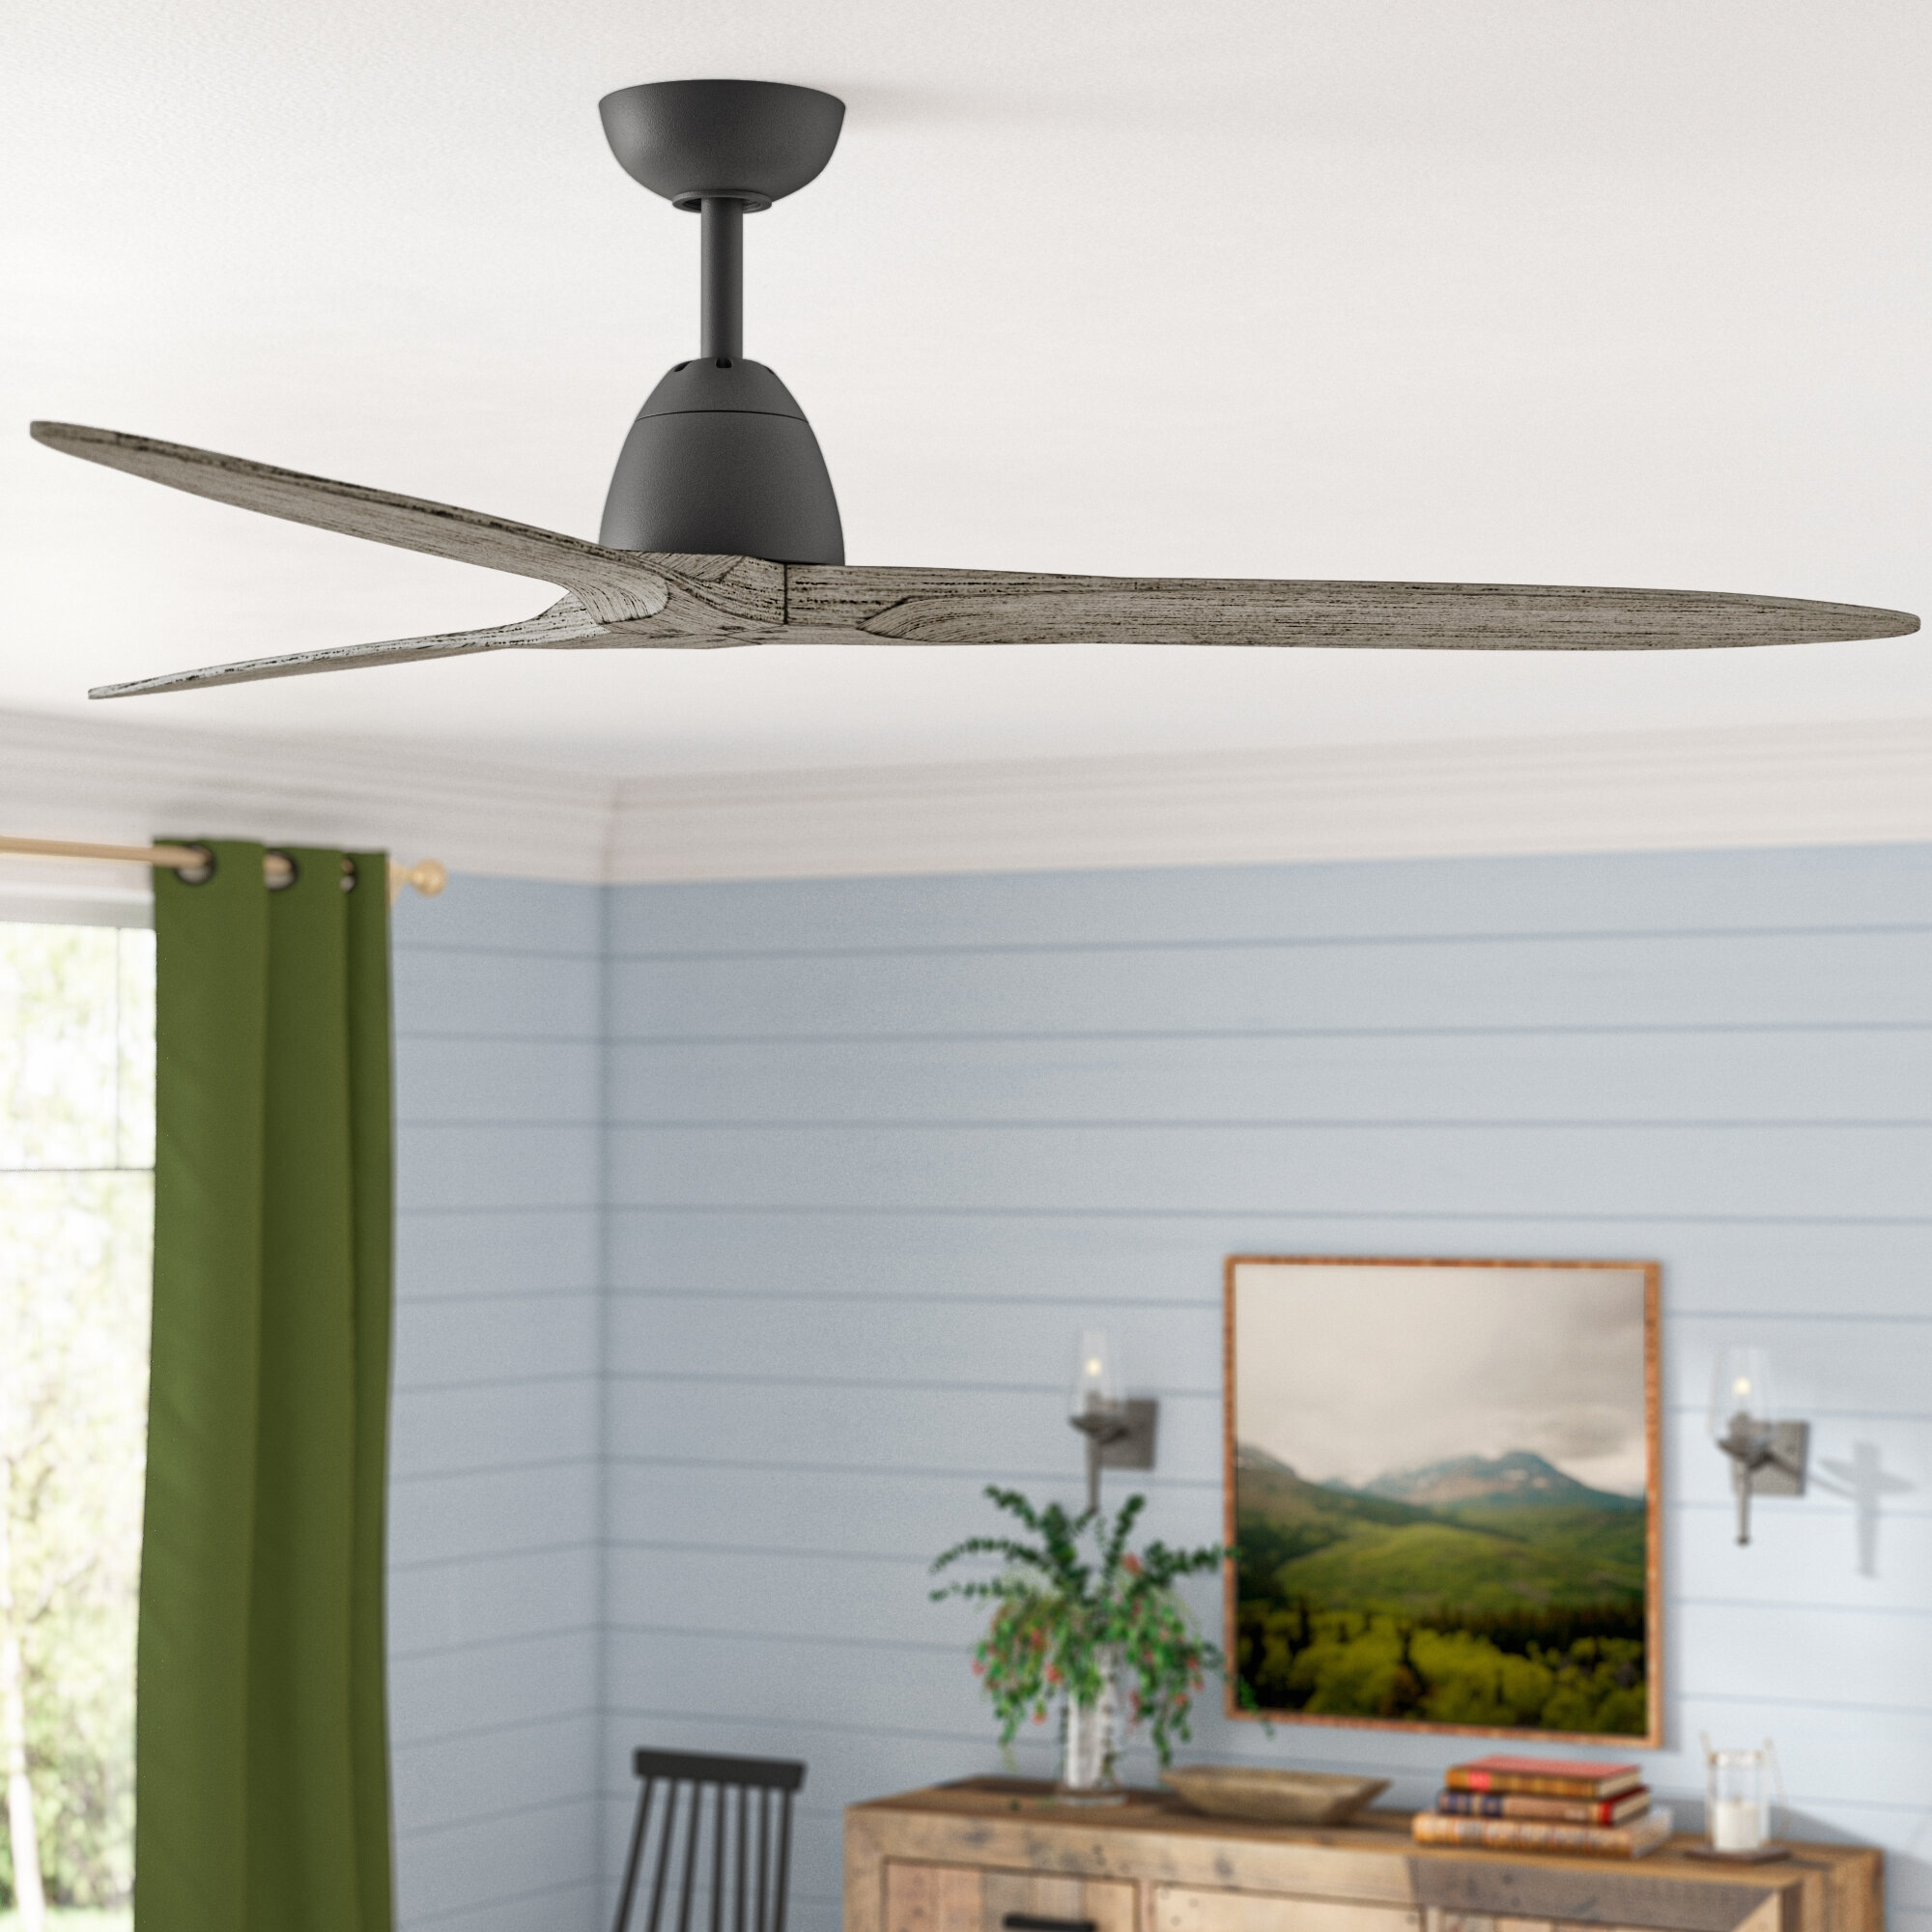 Union Rustic 60 Sherwood 3 Blade Standard Ceiling Fan With Remote Control Reviews Wayfair